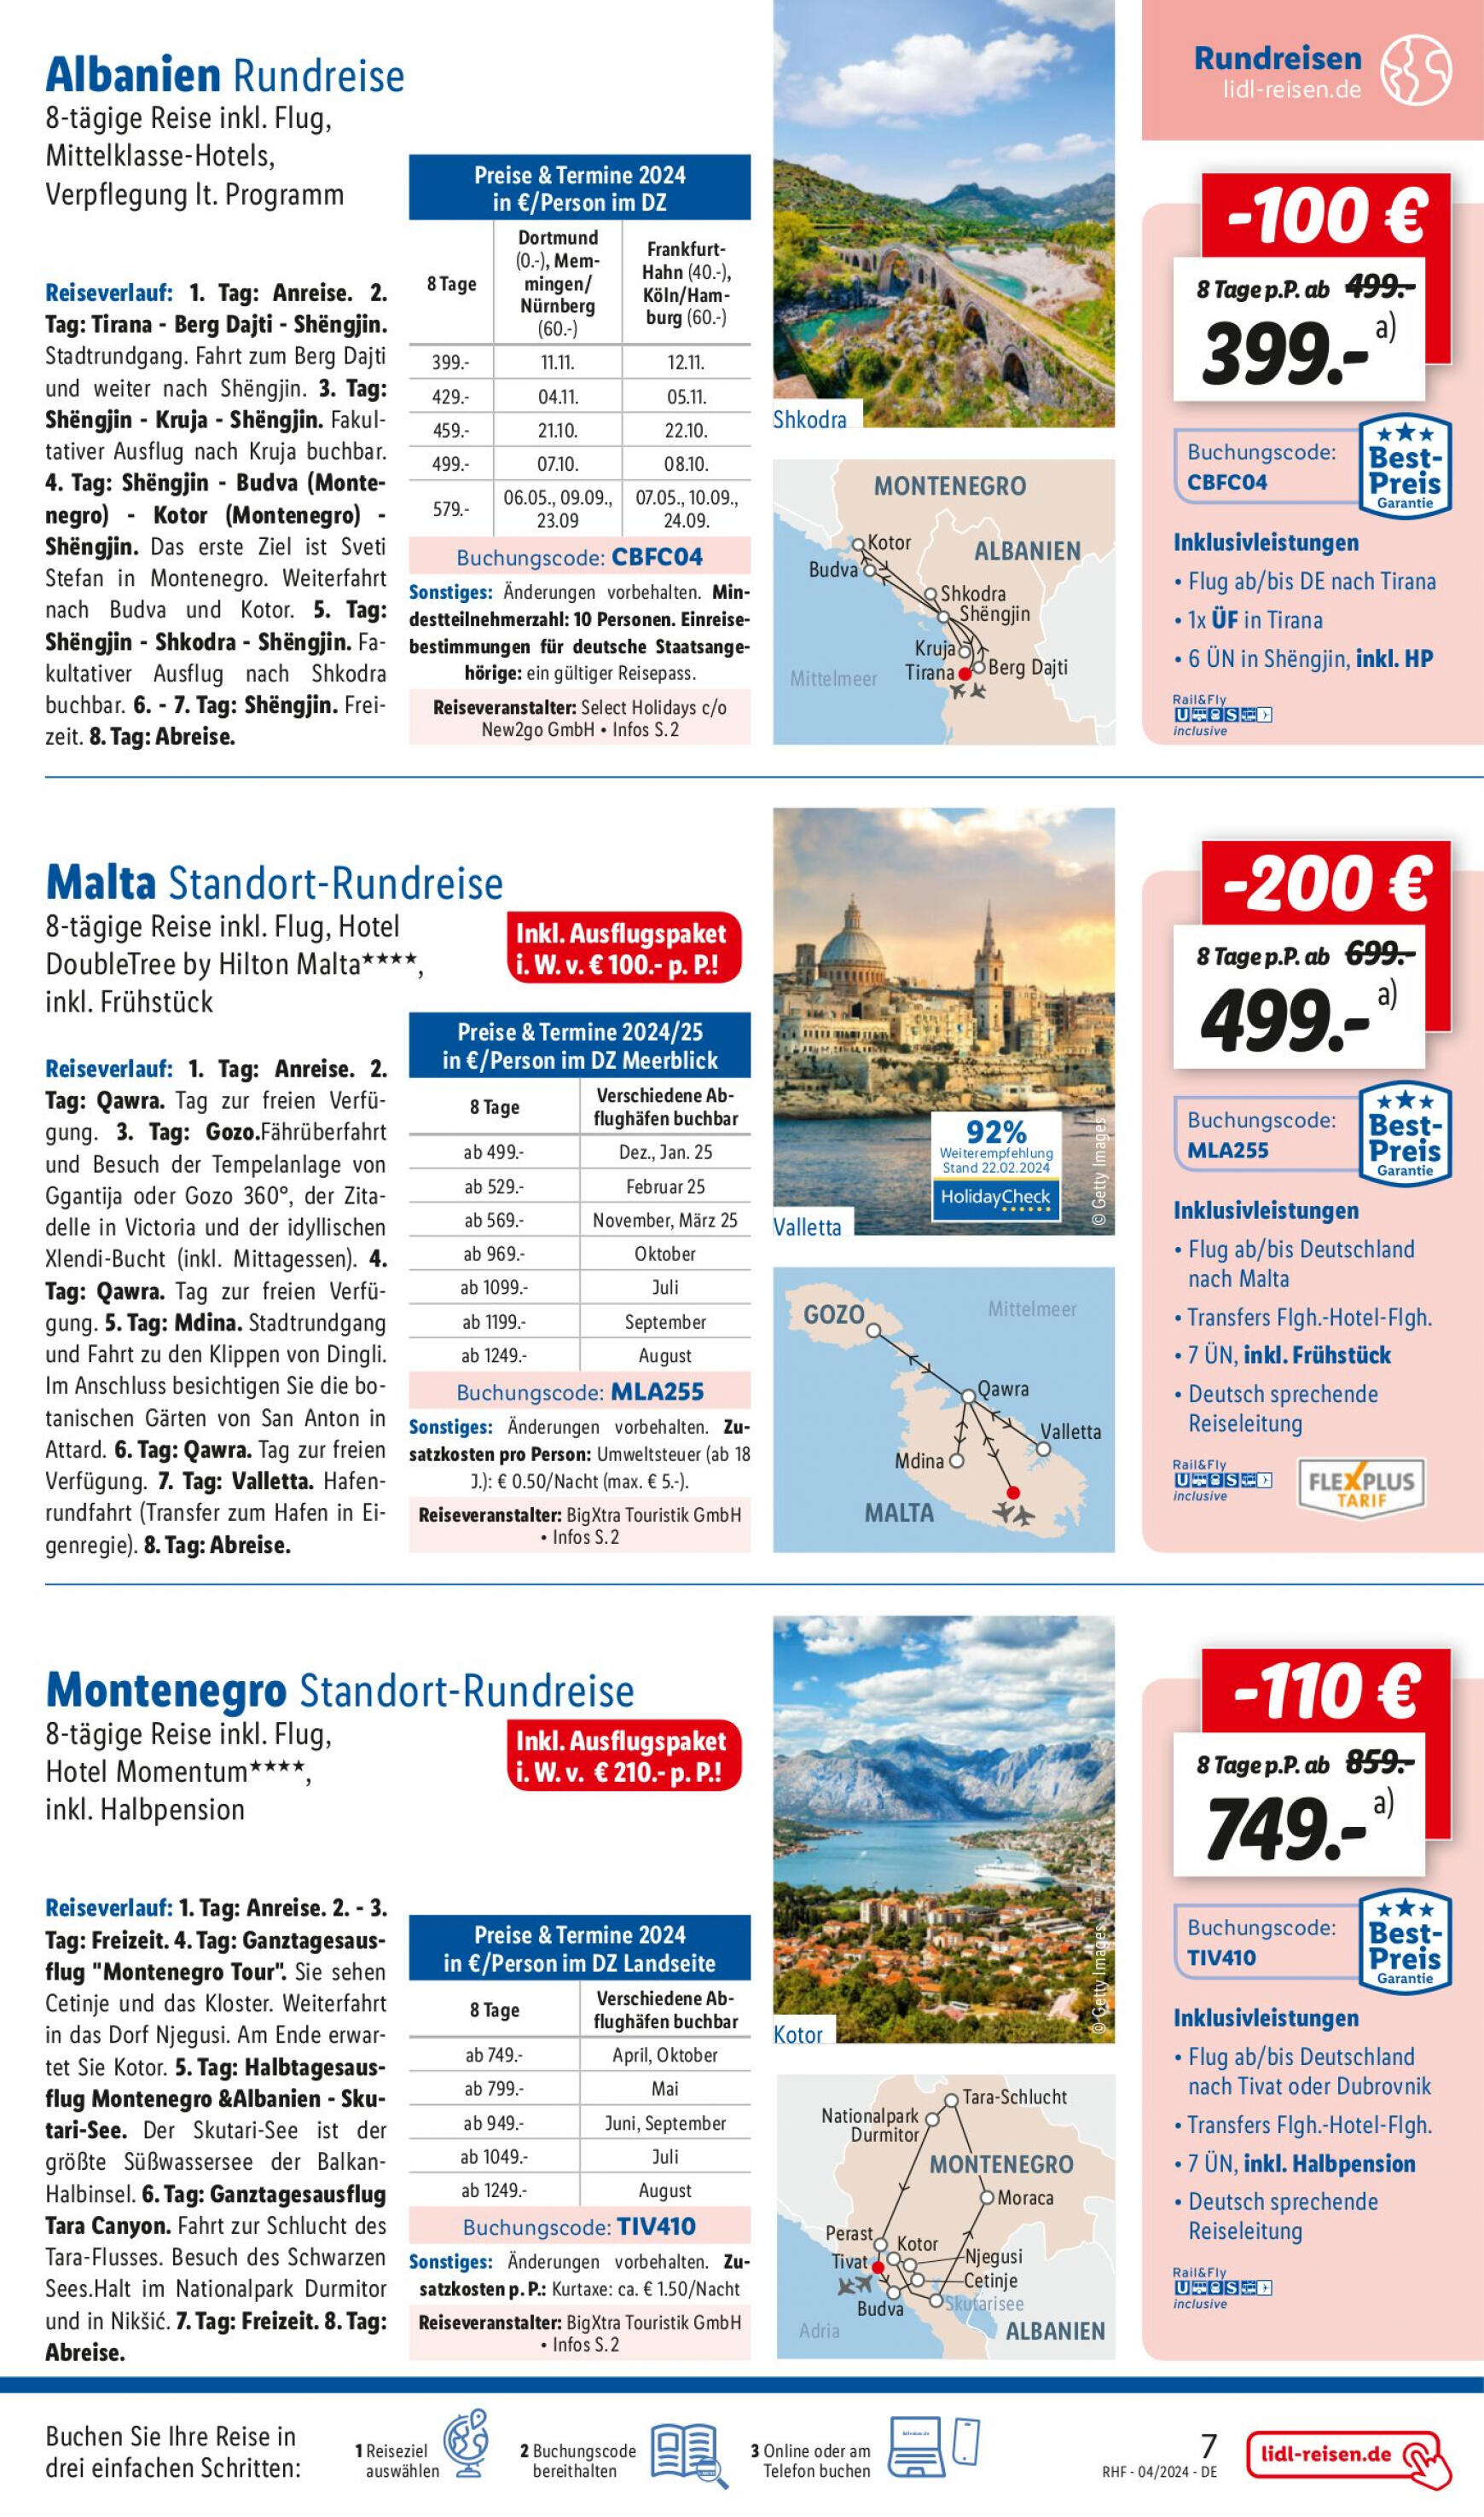 lidl - Flyer Lidl - April Reise-Highlights aktuell 27.03. - 30.04. - page: 7